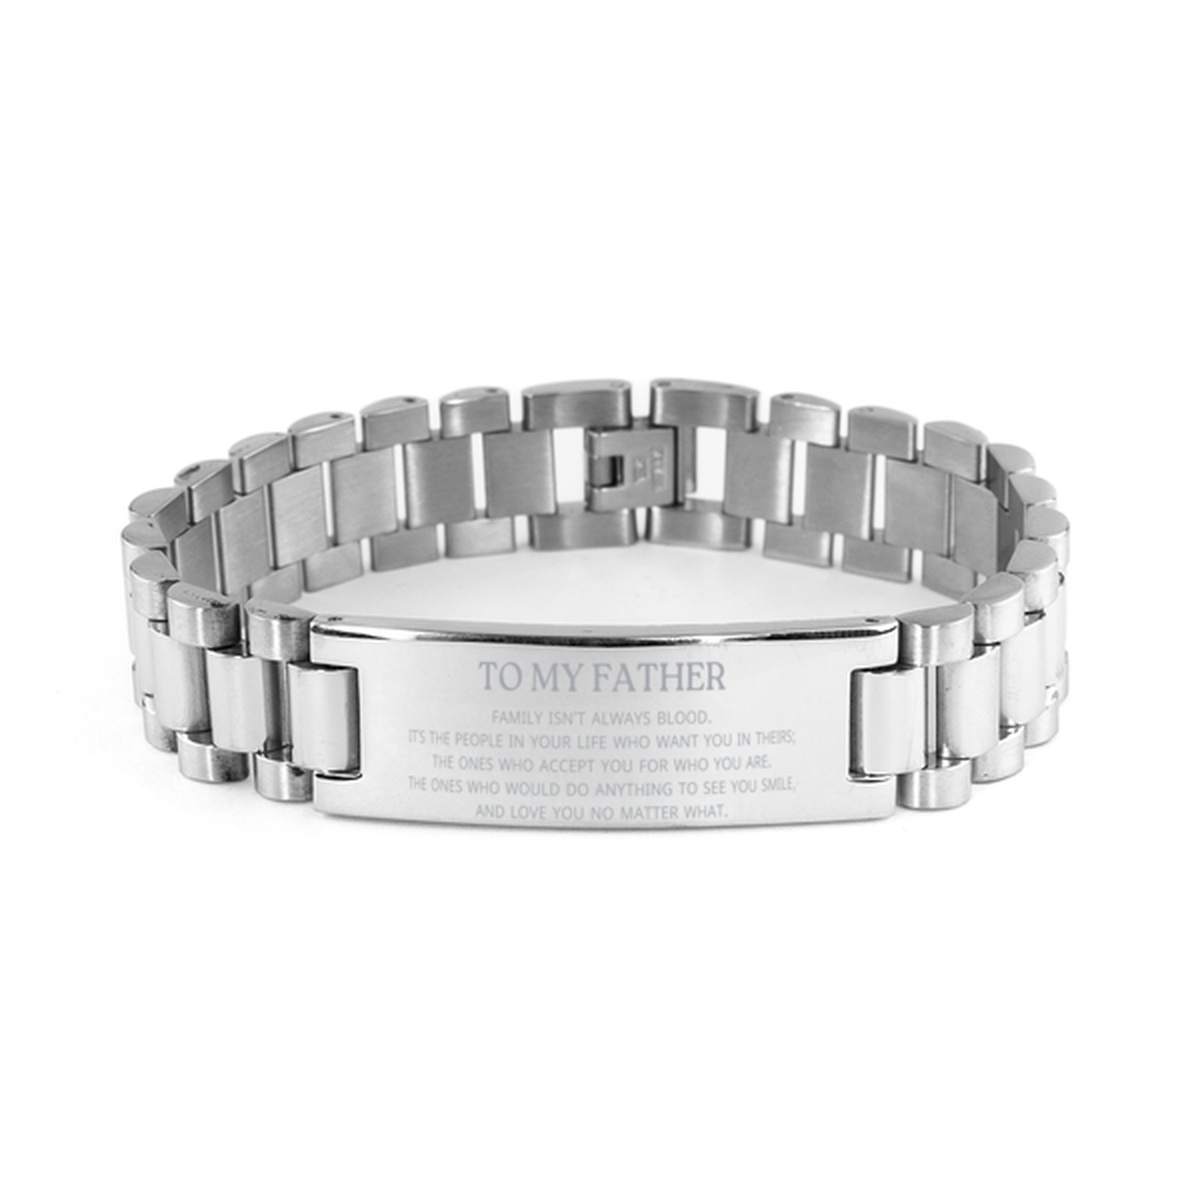 To My Father Gifts, Family isn't always blood, Father Ladder Stainless Steel Bracelet, Birthday Christmas Unique Present For Father